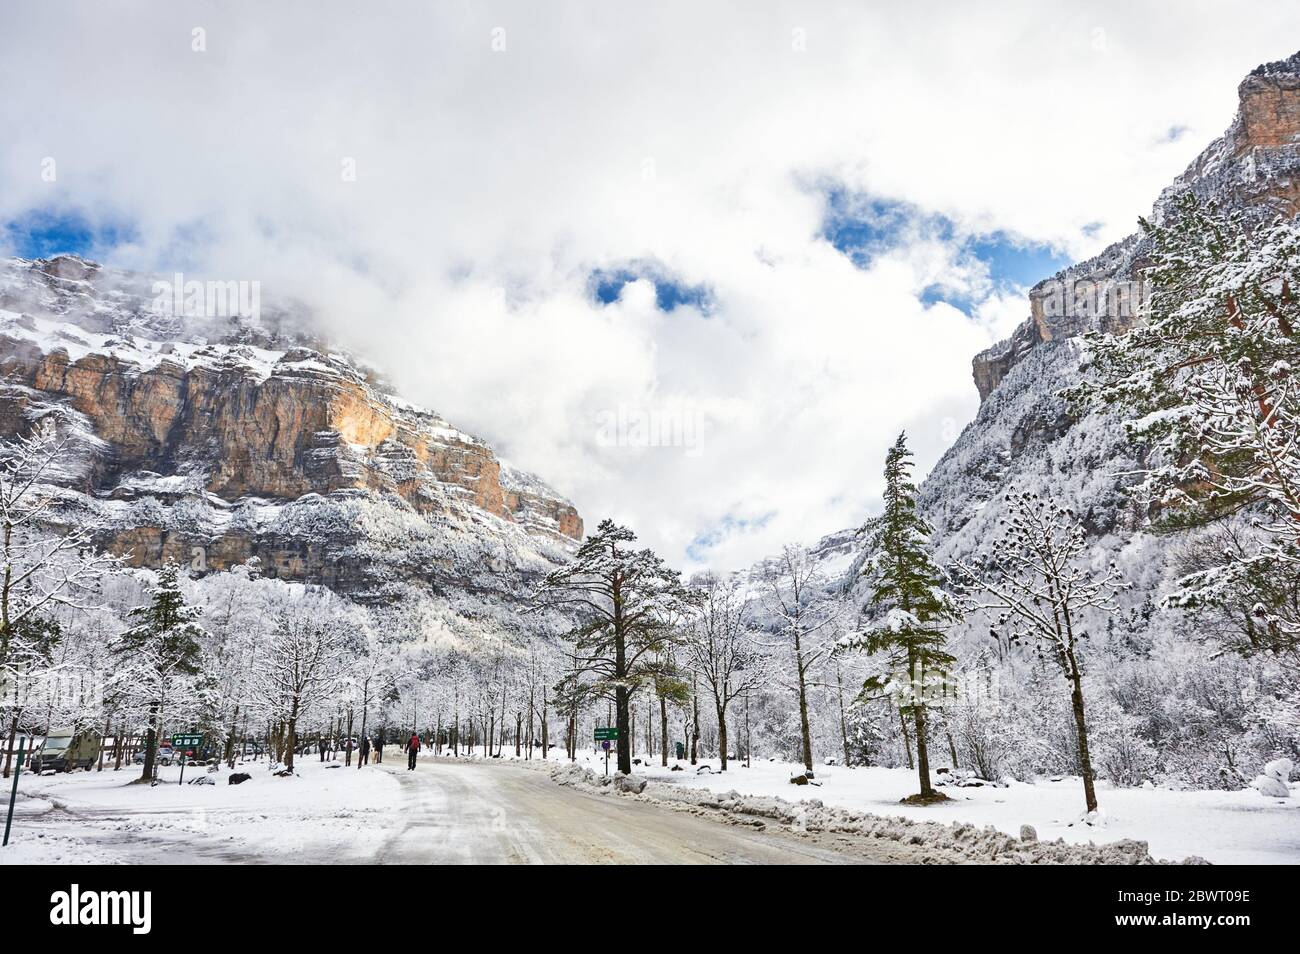 Pyrenees: Snowy landscape in Meadow of Ordesa, entrance to the National park of Ordesa and Monte Perdido (Huesca province, Aragon region, Spain) Stock Photo